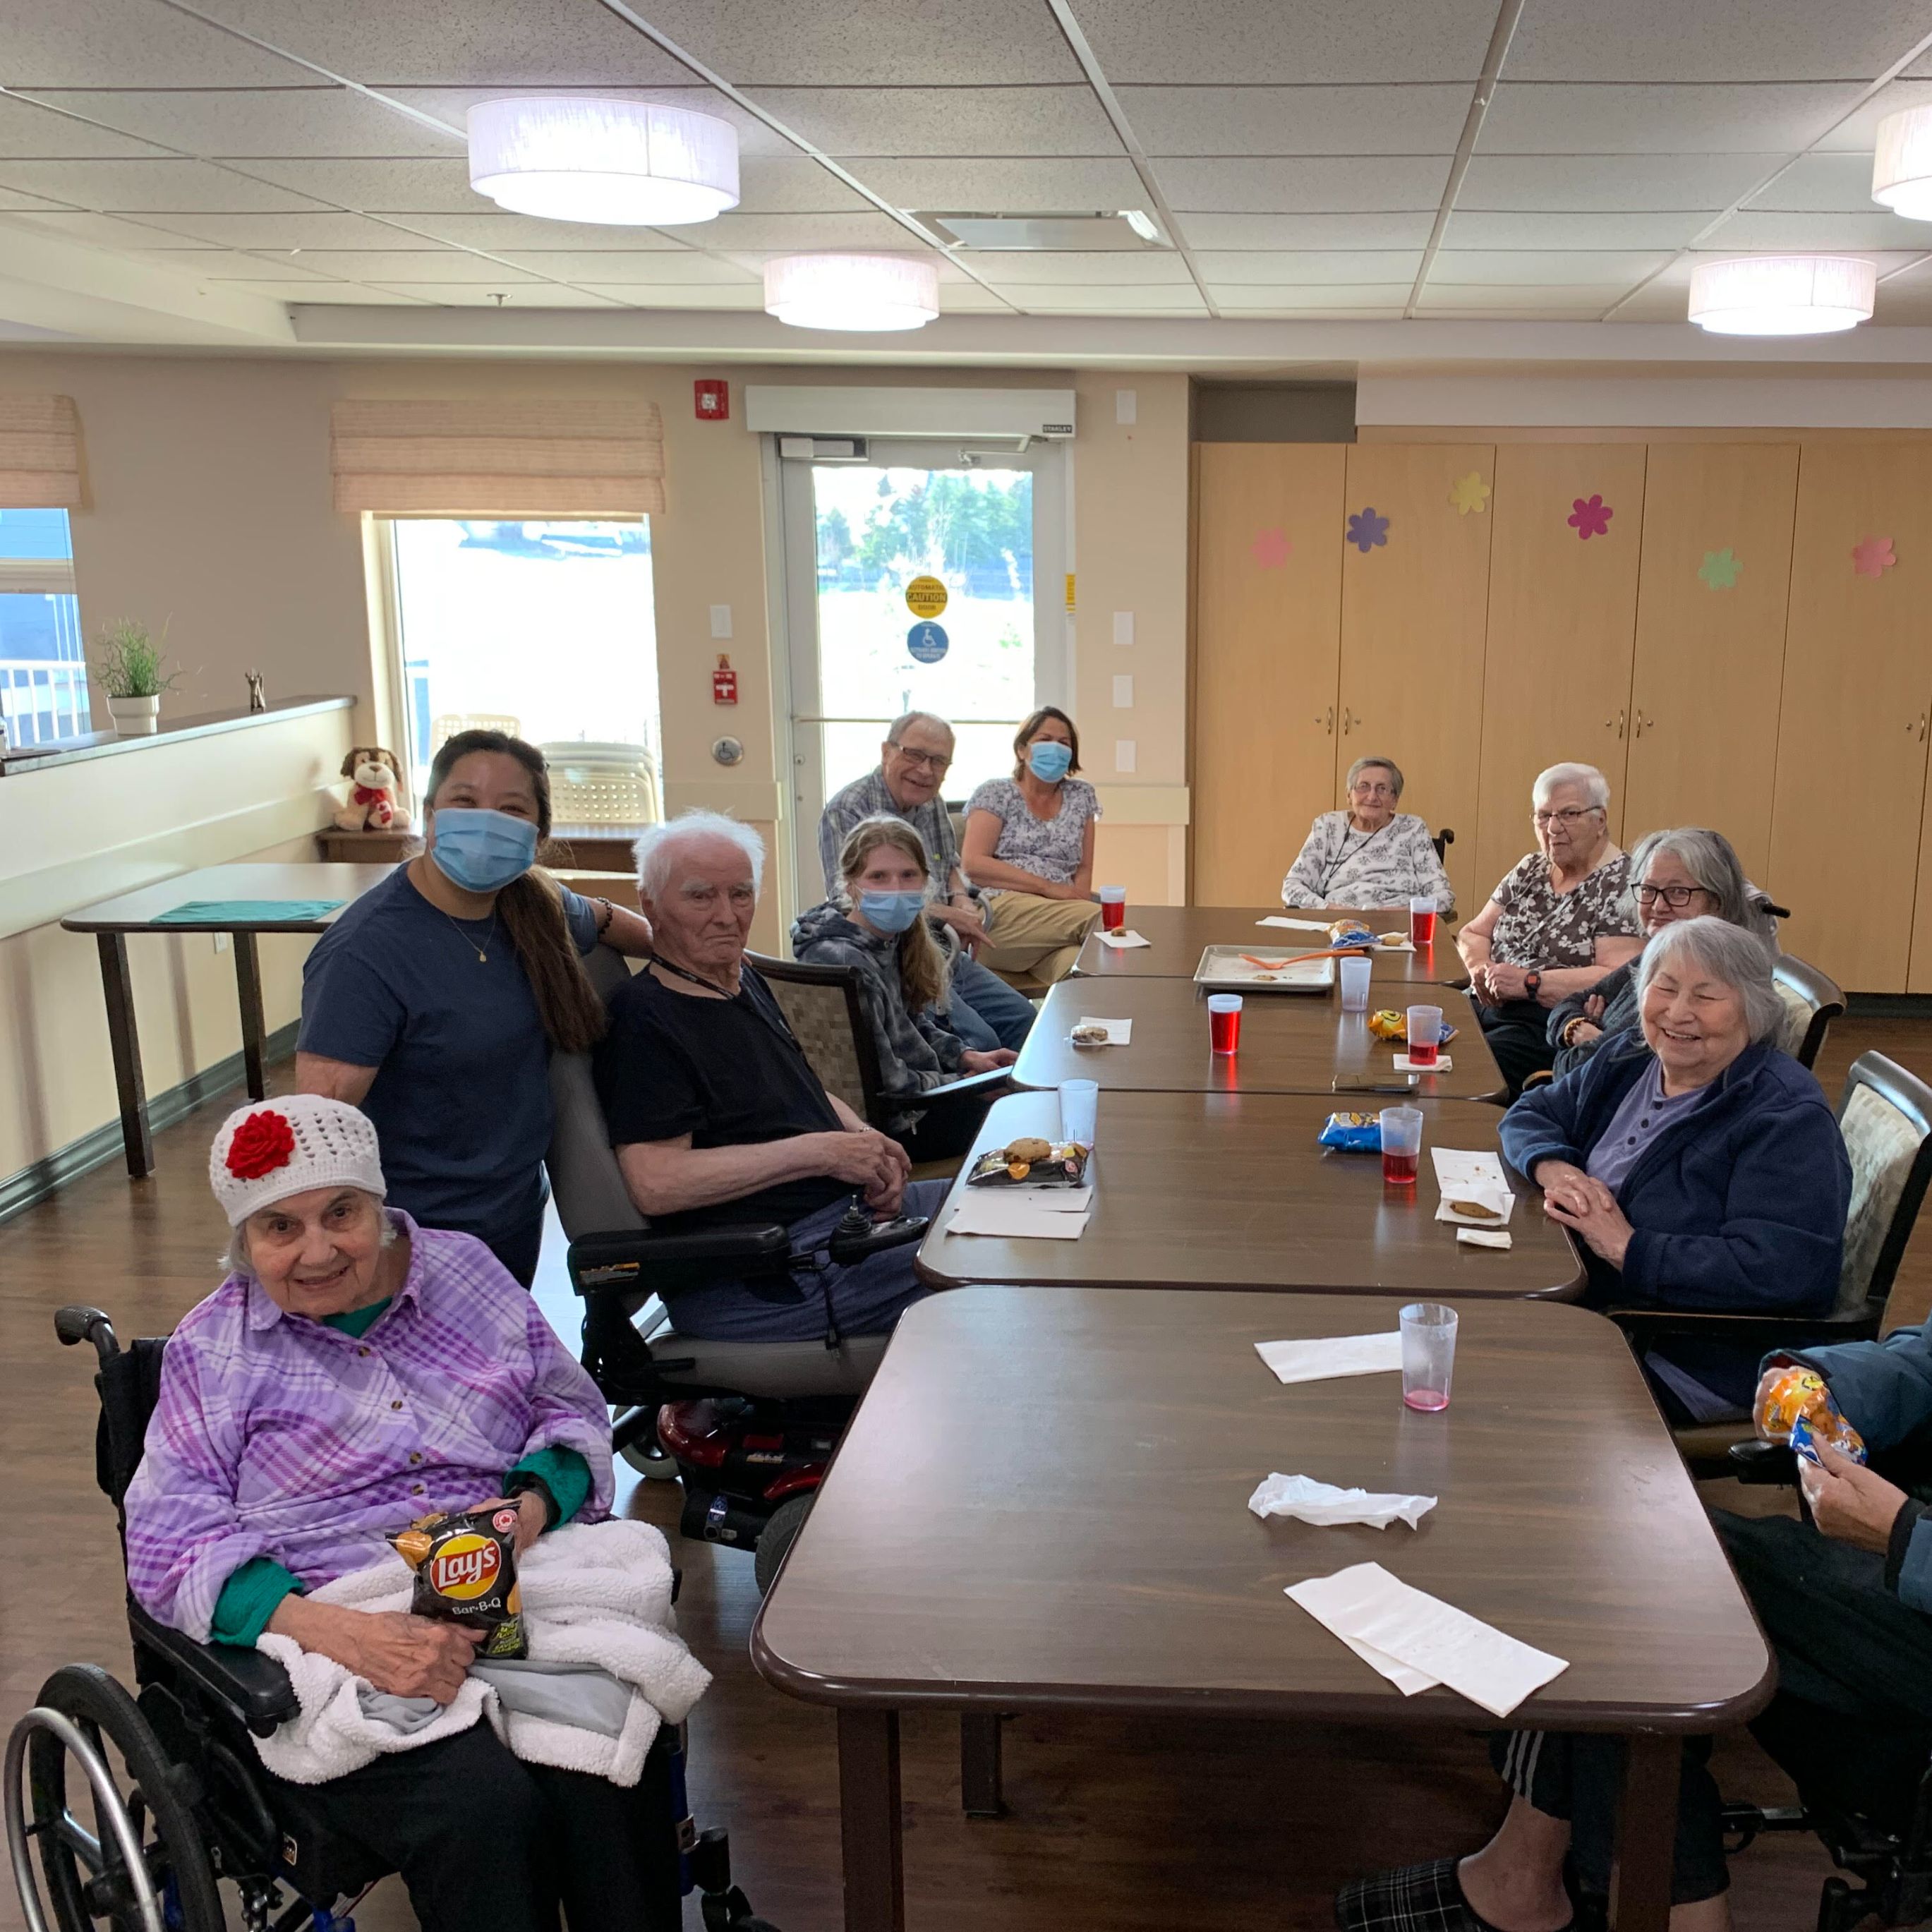 Senior residents seated at a table together with chips and juice.